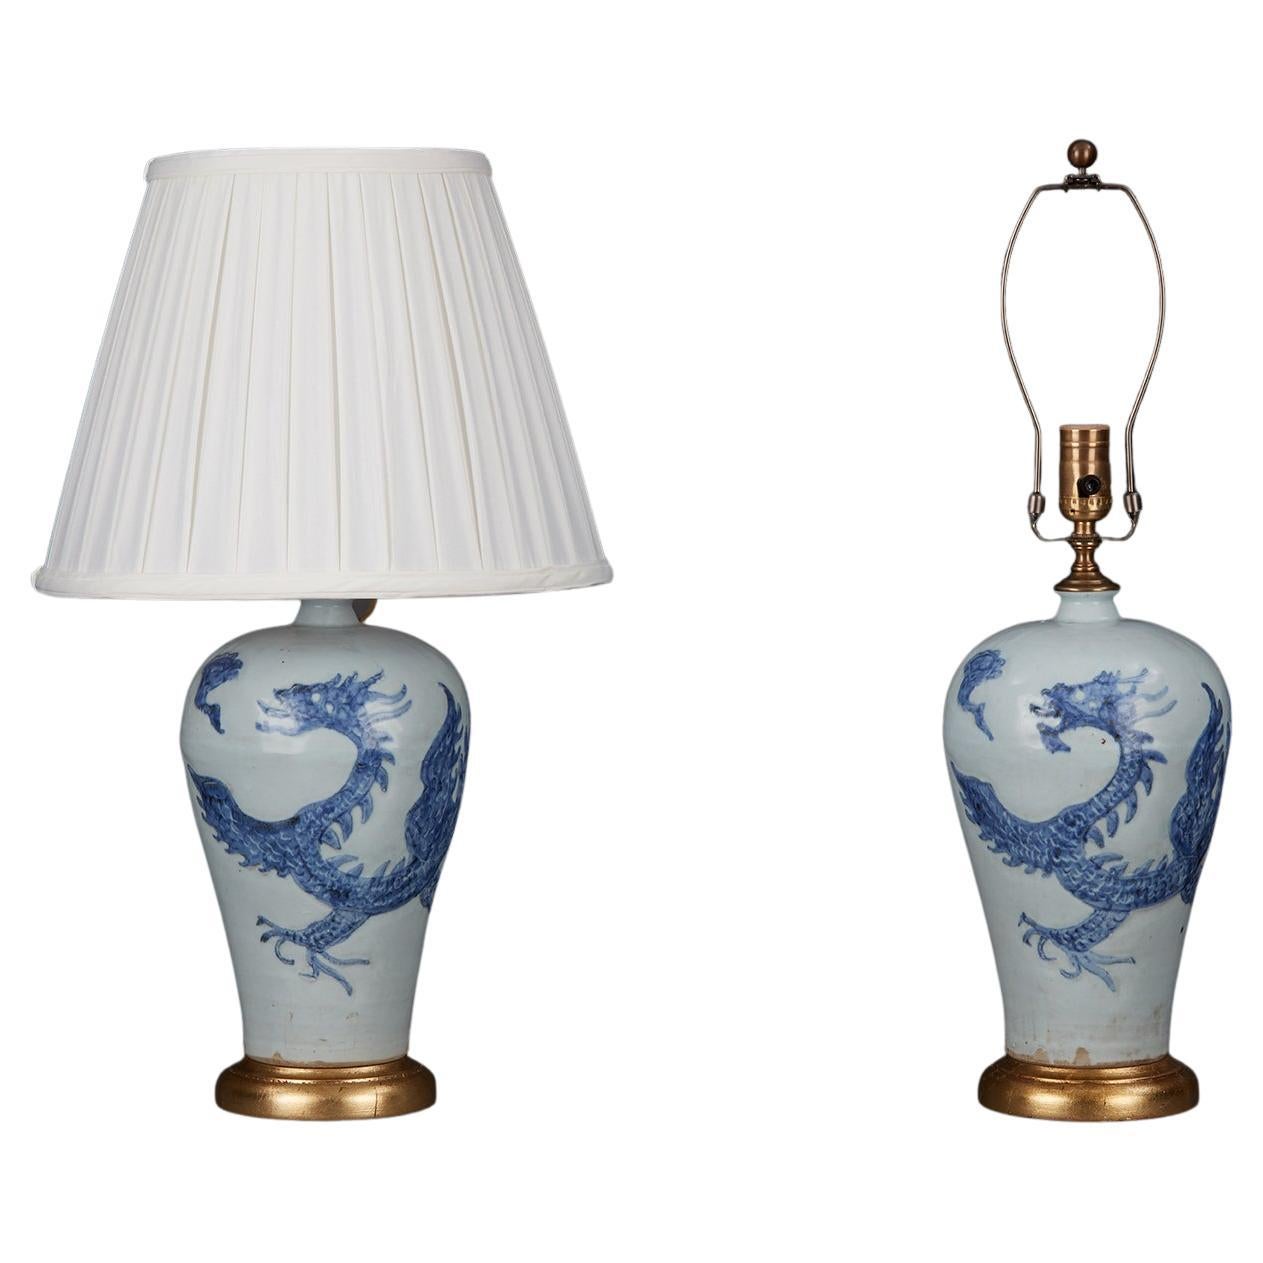 Pair Blue and White Chinese Porcelain Lamps w/ Dragon Motif 20th Century